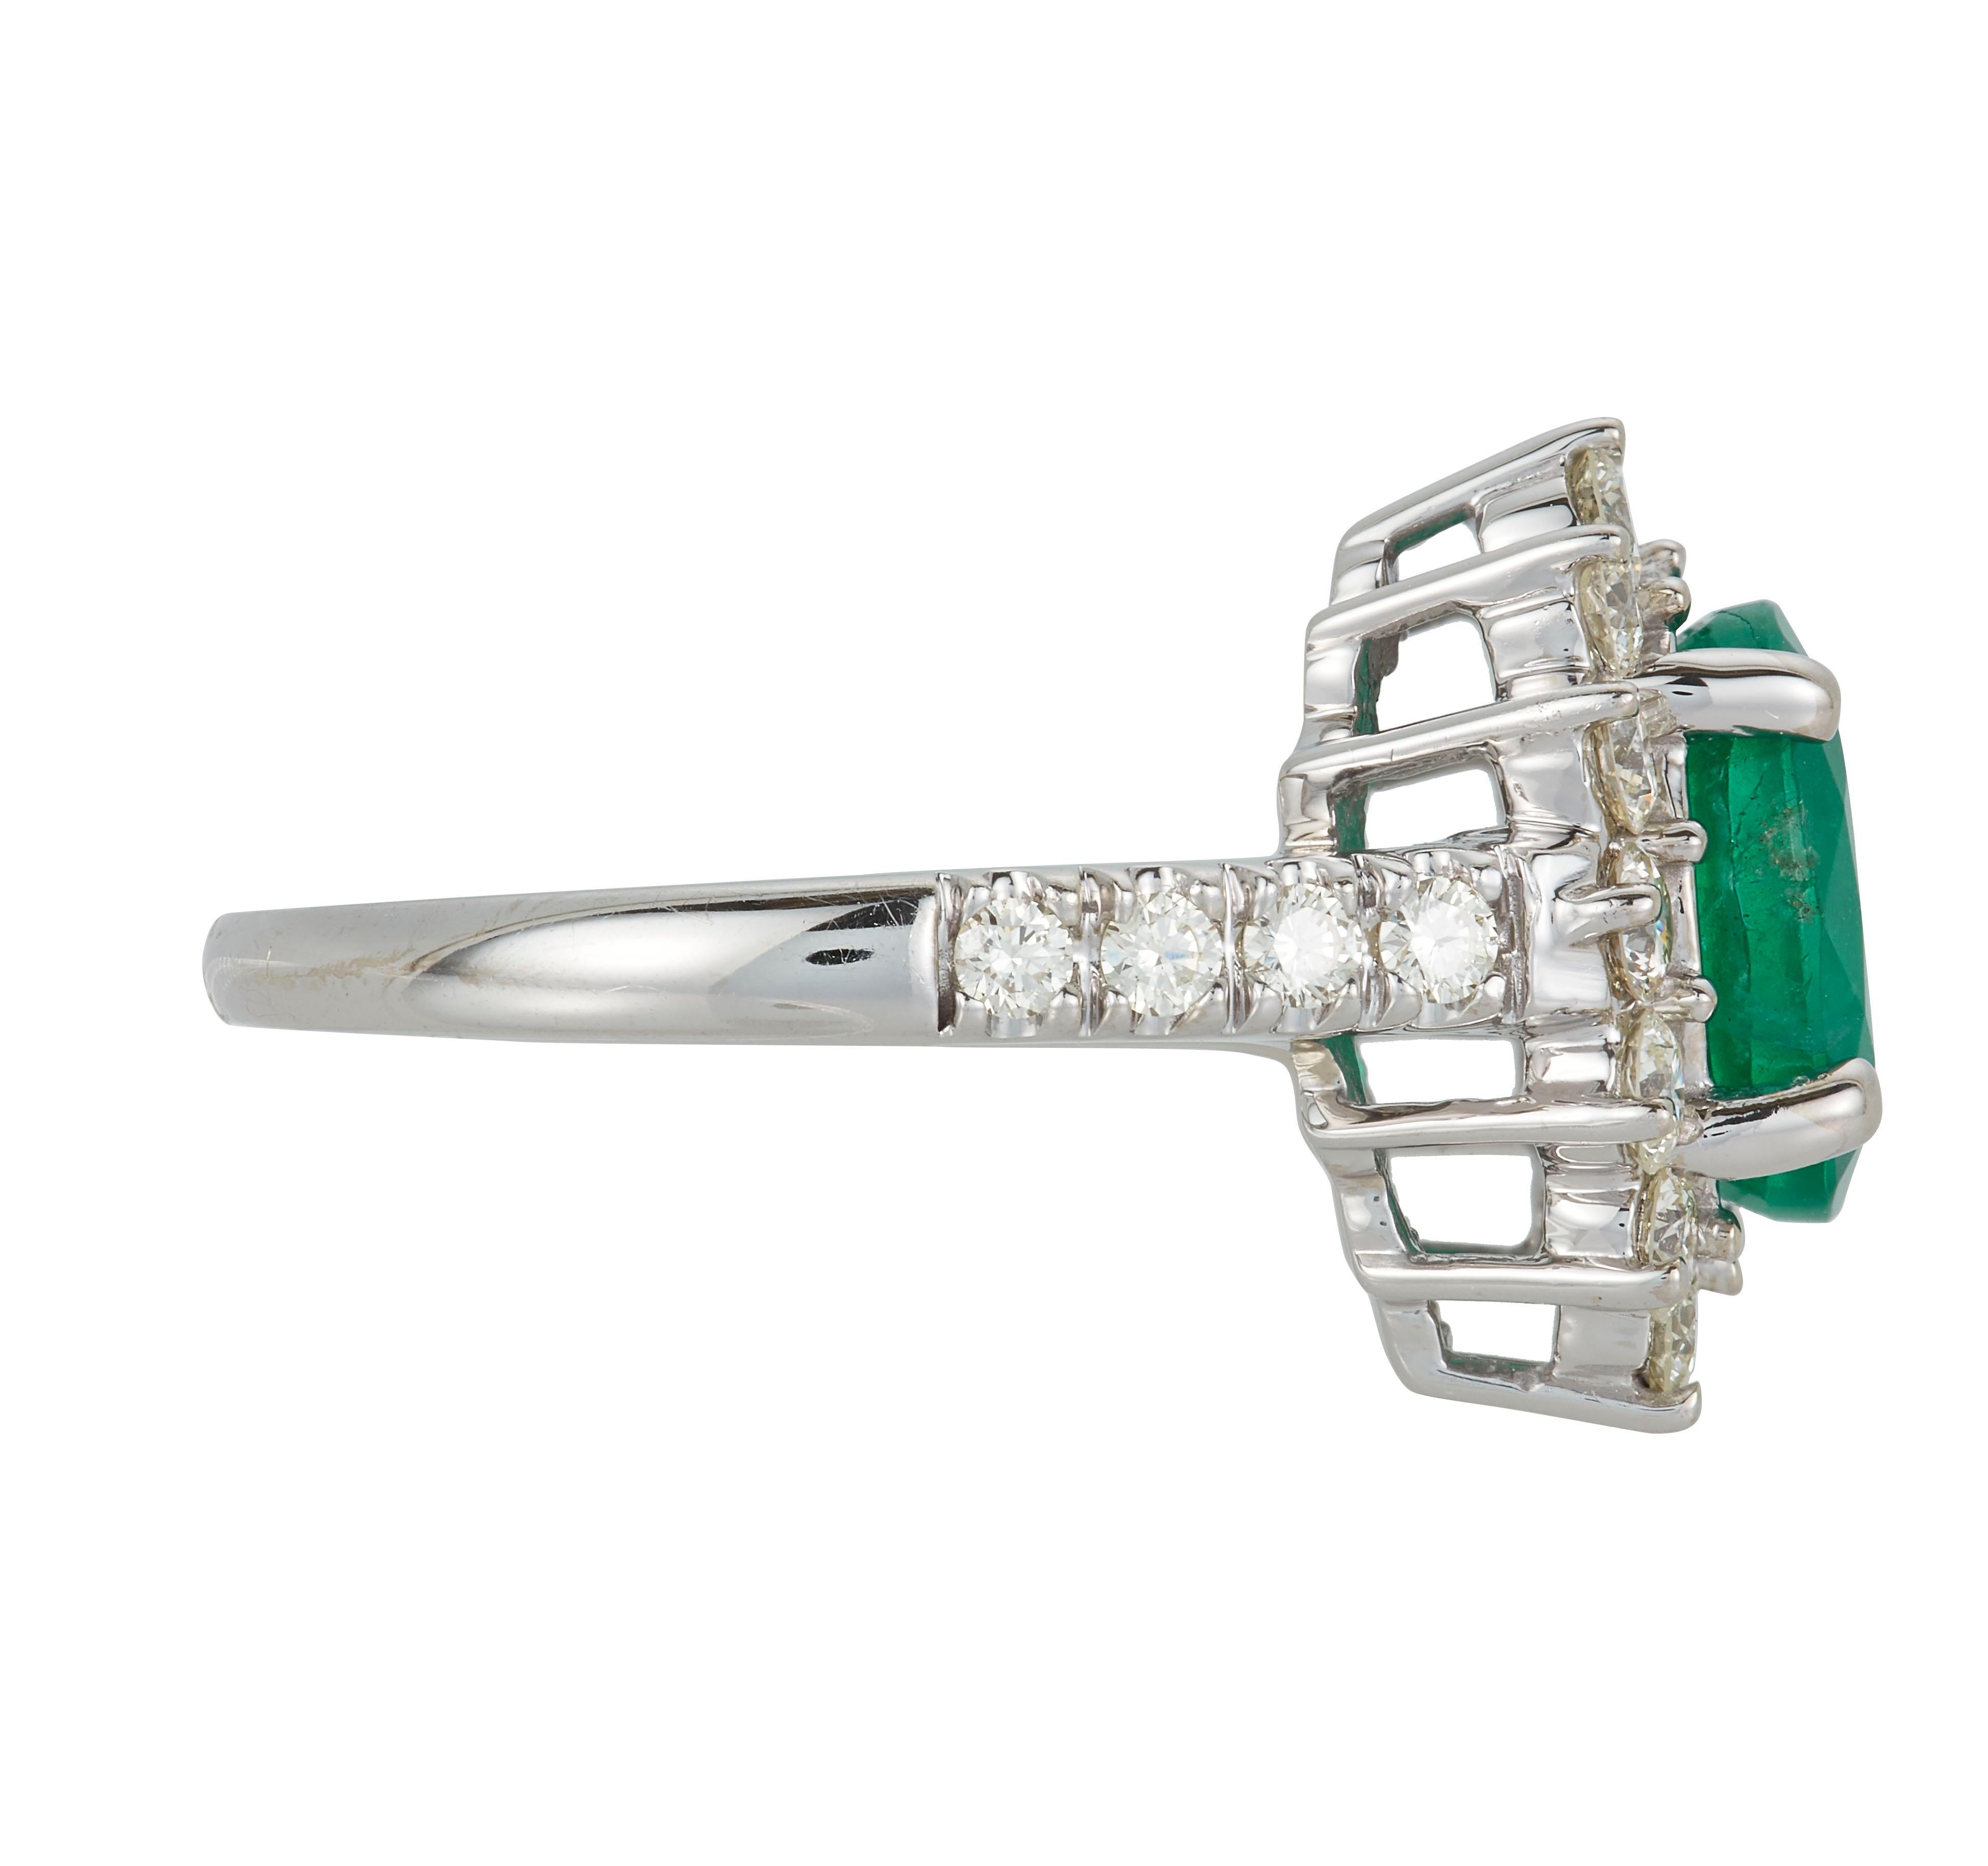 14K White Gold
1 Oval Emerald at 2.92 Carats- Measuring 10x8 mm
22 Brilliant Round White Diamonds at 1.12 Carats - Color: H-I /Clarity: SI

Alberto offers complimentary sizing on all rings.

Fine one-of-a-kind craftsmanship meets incredible quality